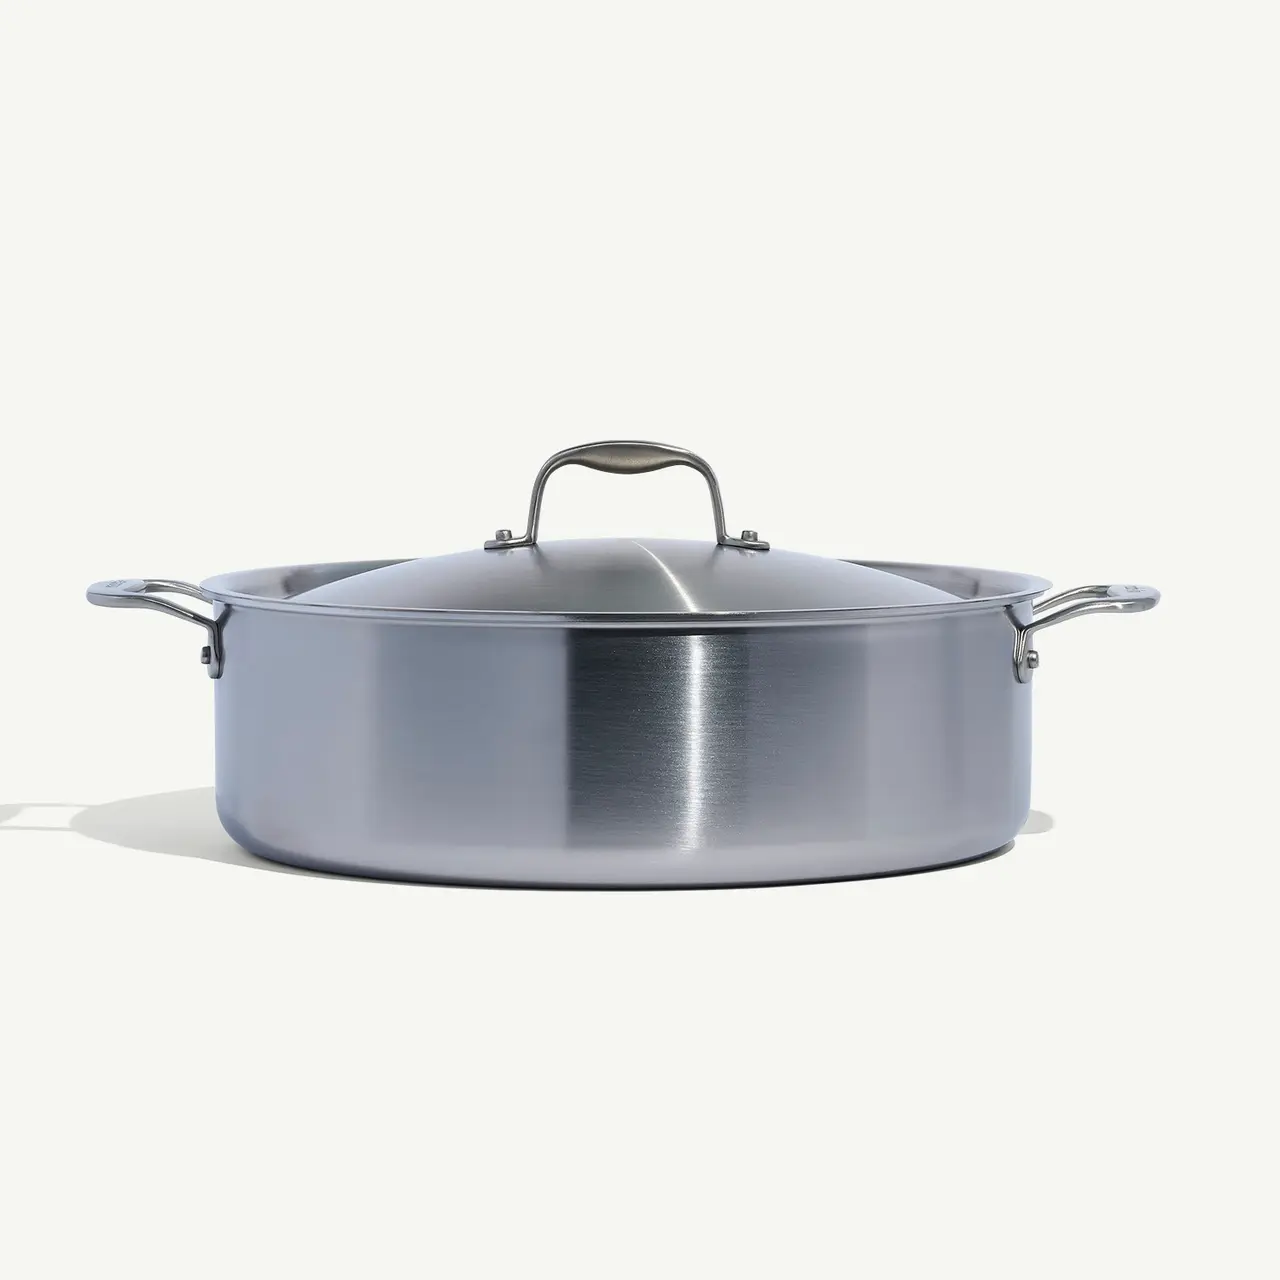 A stainless steel pot with a lid and two handles against a white background.